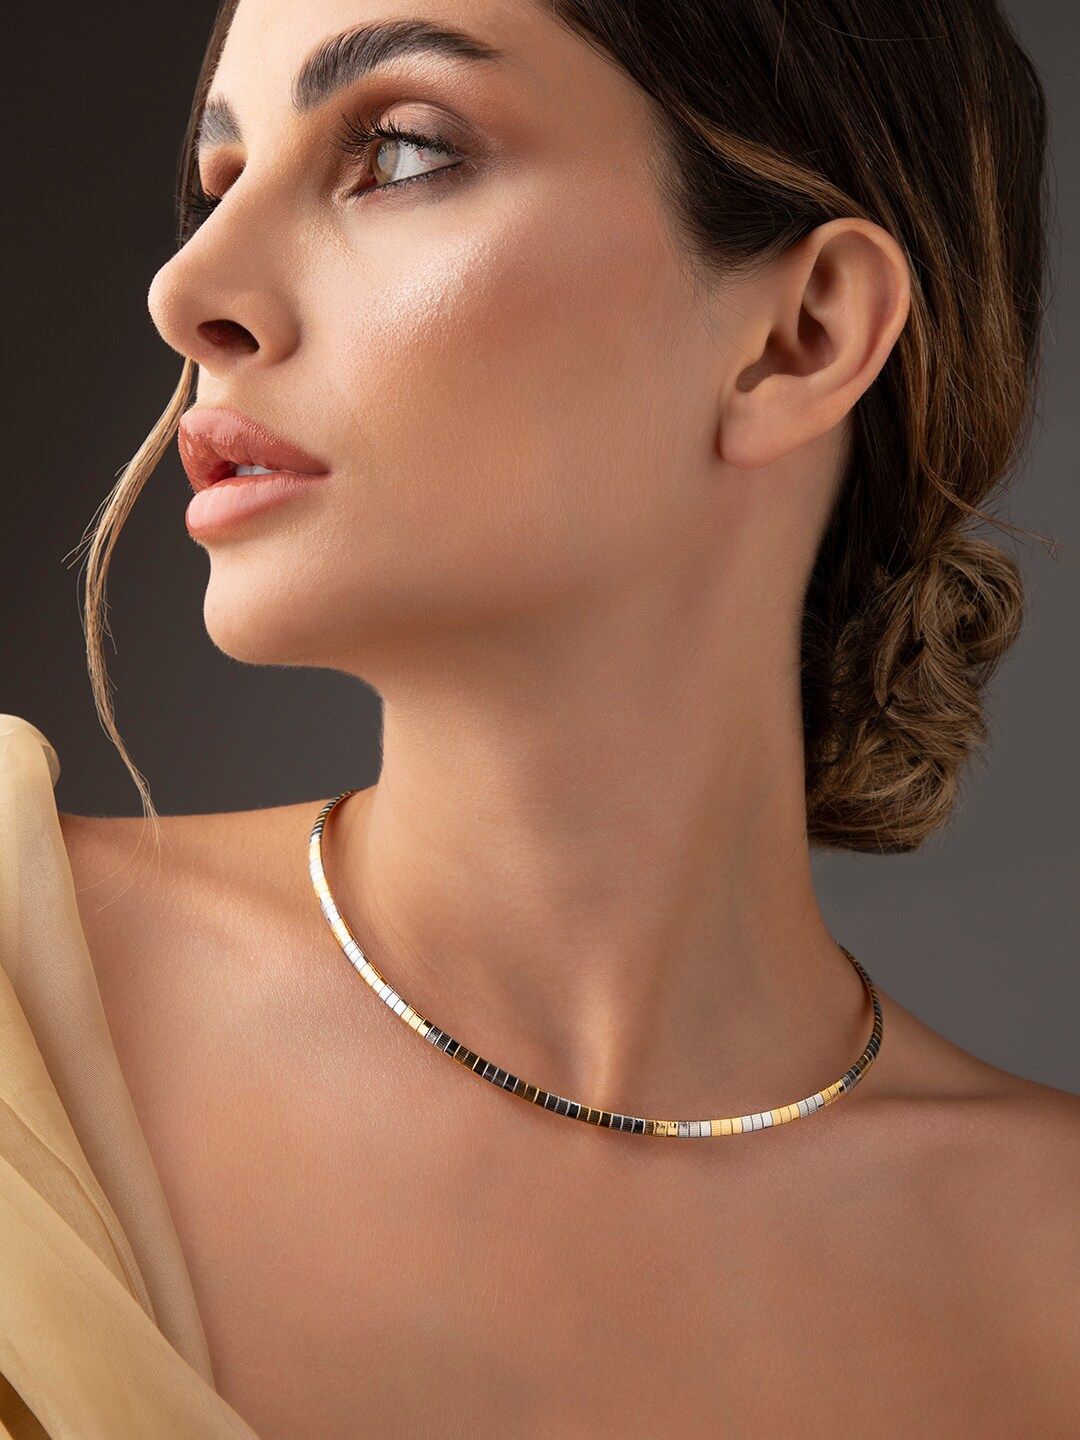 Rubans Voguish Silver-Toned & Gold-Plated Necklace Price in India